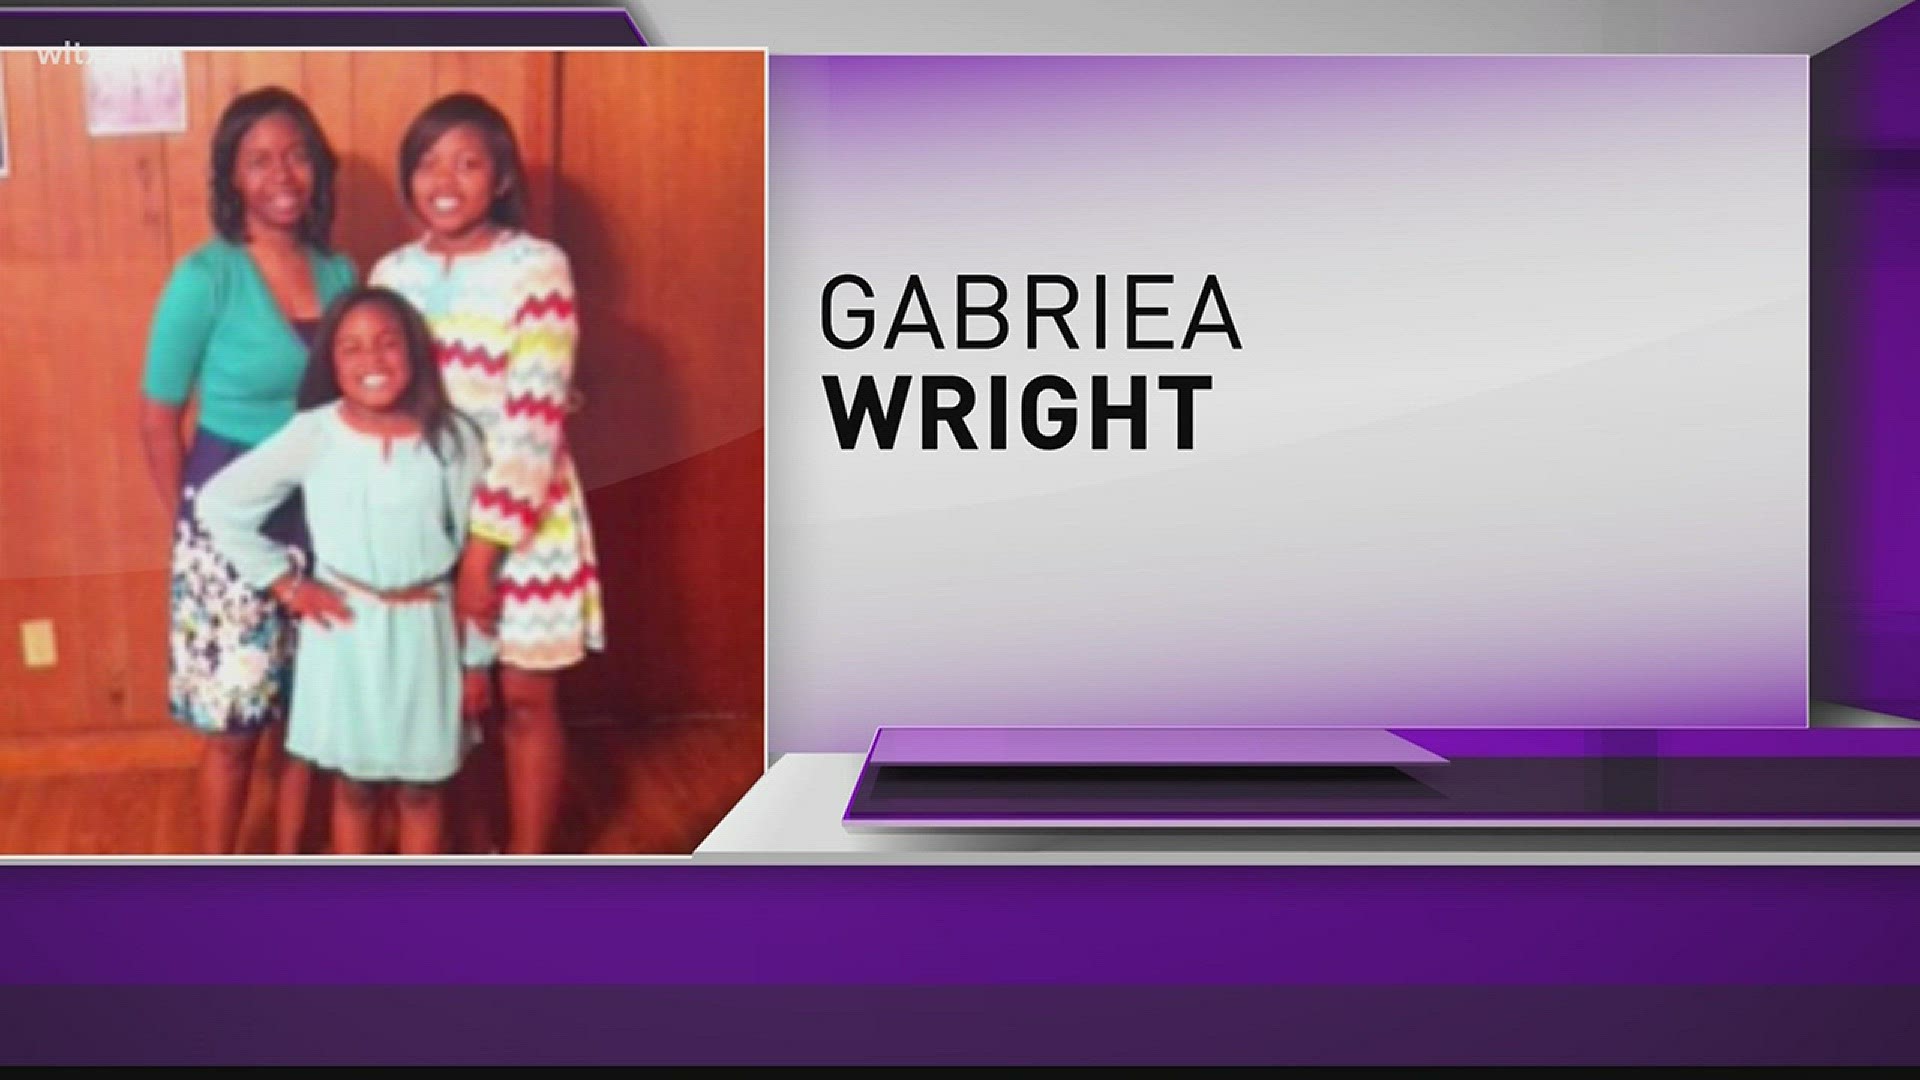 Congratulations to our Mom of the Day, Gabriea Wright! Gabriea was nominated by her daughters McKenzie and Linda.